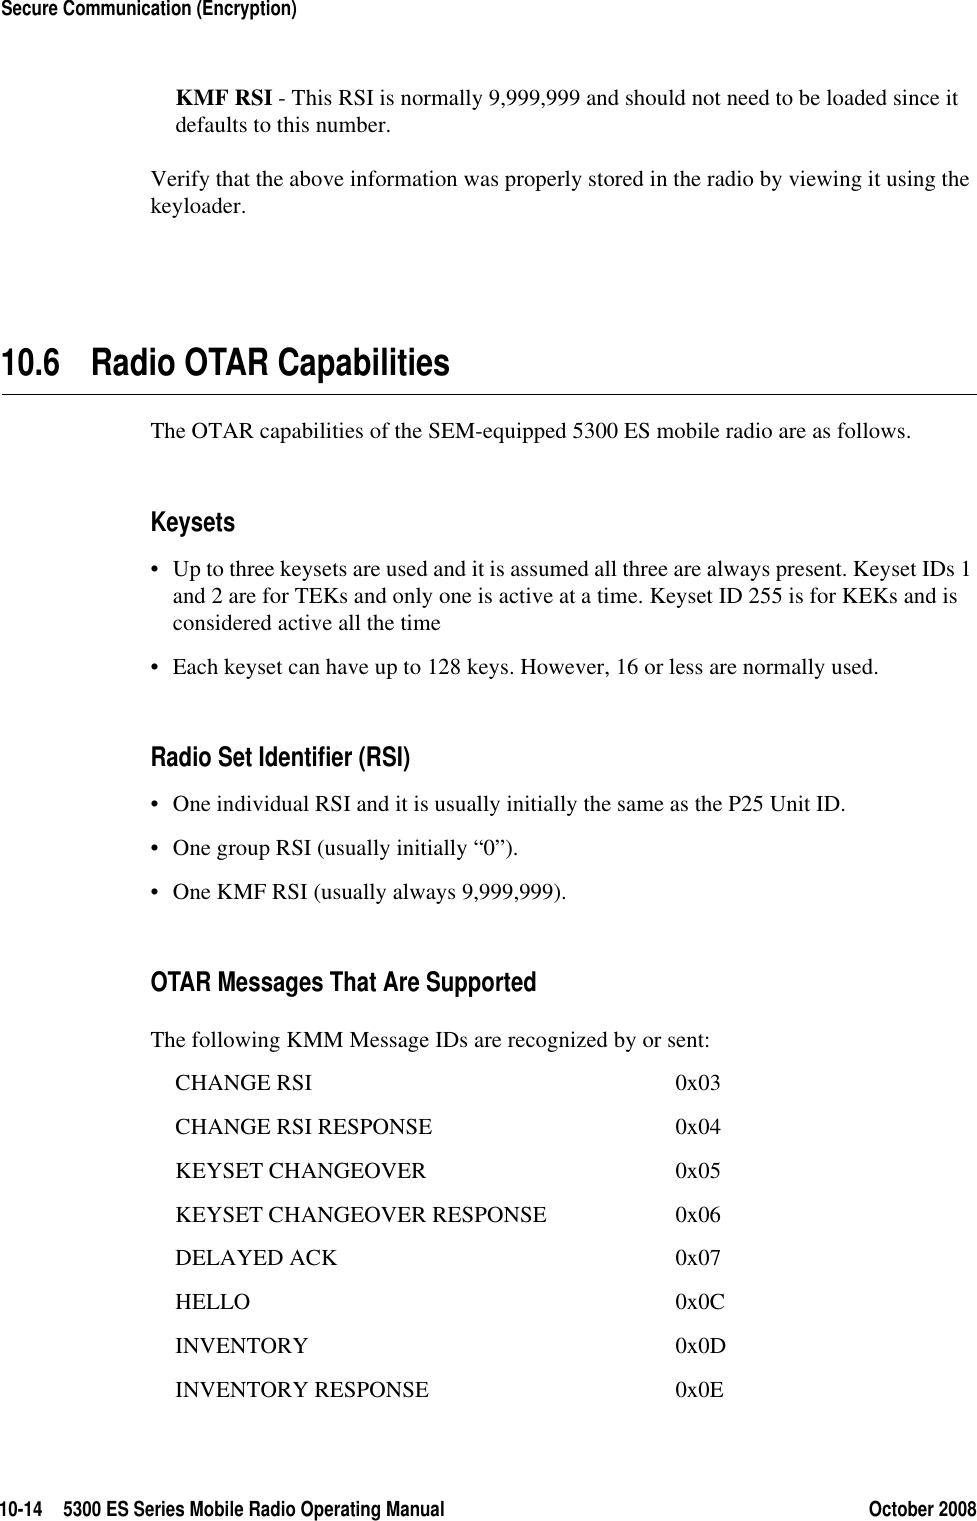 10-14 5300 ES Series Mobile Radio Operating Manual October 2008Secure Communication (Encryption)KMF RSI - This RSI is normally 9,999,999 and should not need to be loaded since it defaults to this number. Verify that the above information was properly stored in the radio by viewing it using the keyloader.10.6 Radio OTAR CapabilitiesThe OTAR capabilities of the SEM-equipped 5300 ES mobile radio are as follows.Keysets• Up to three keysets are used and it is assumed all three are always present. Keyset IDs 1 and 2 are for TEKs and only one is active at a time. Keyset ID 255 is for KEKs and is considered active all the time• Each keyset can have up to 128 keys. However, 16 or less are normally used. Radio Set Identifier (RSI)• One individual RSI and it is usually initially the same as the P25 Unit ID.• One group RSI (usually initially “0”).• One KMF RSI (usually always 9,999,999).OTAR Messages That Are SupportedThe following KMM Message IDs are recognized by or sent:CHANGE RSI 0x03CHANGE RSI RESPONSE 0x04KEYSET CHANGEOVER 0x05KEYSET CHANGEOVER RESPONSE 0x06DELAYED ACK 0x07HELLO 0x0CINVENTORY 0x0DINVENTORY RESPONSE 0x0E